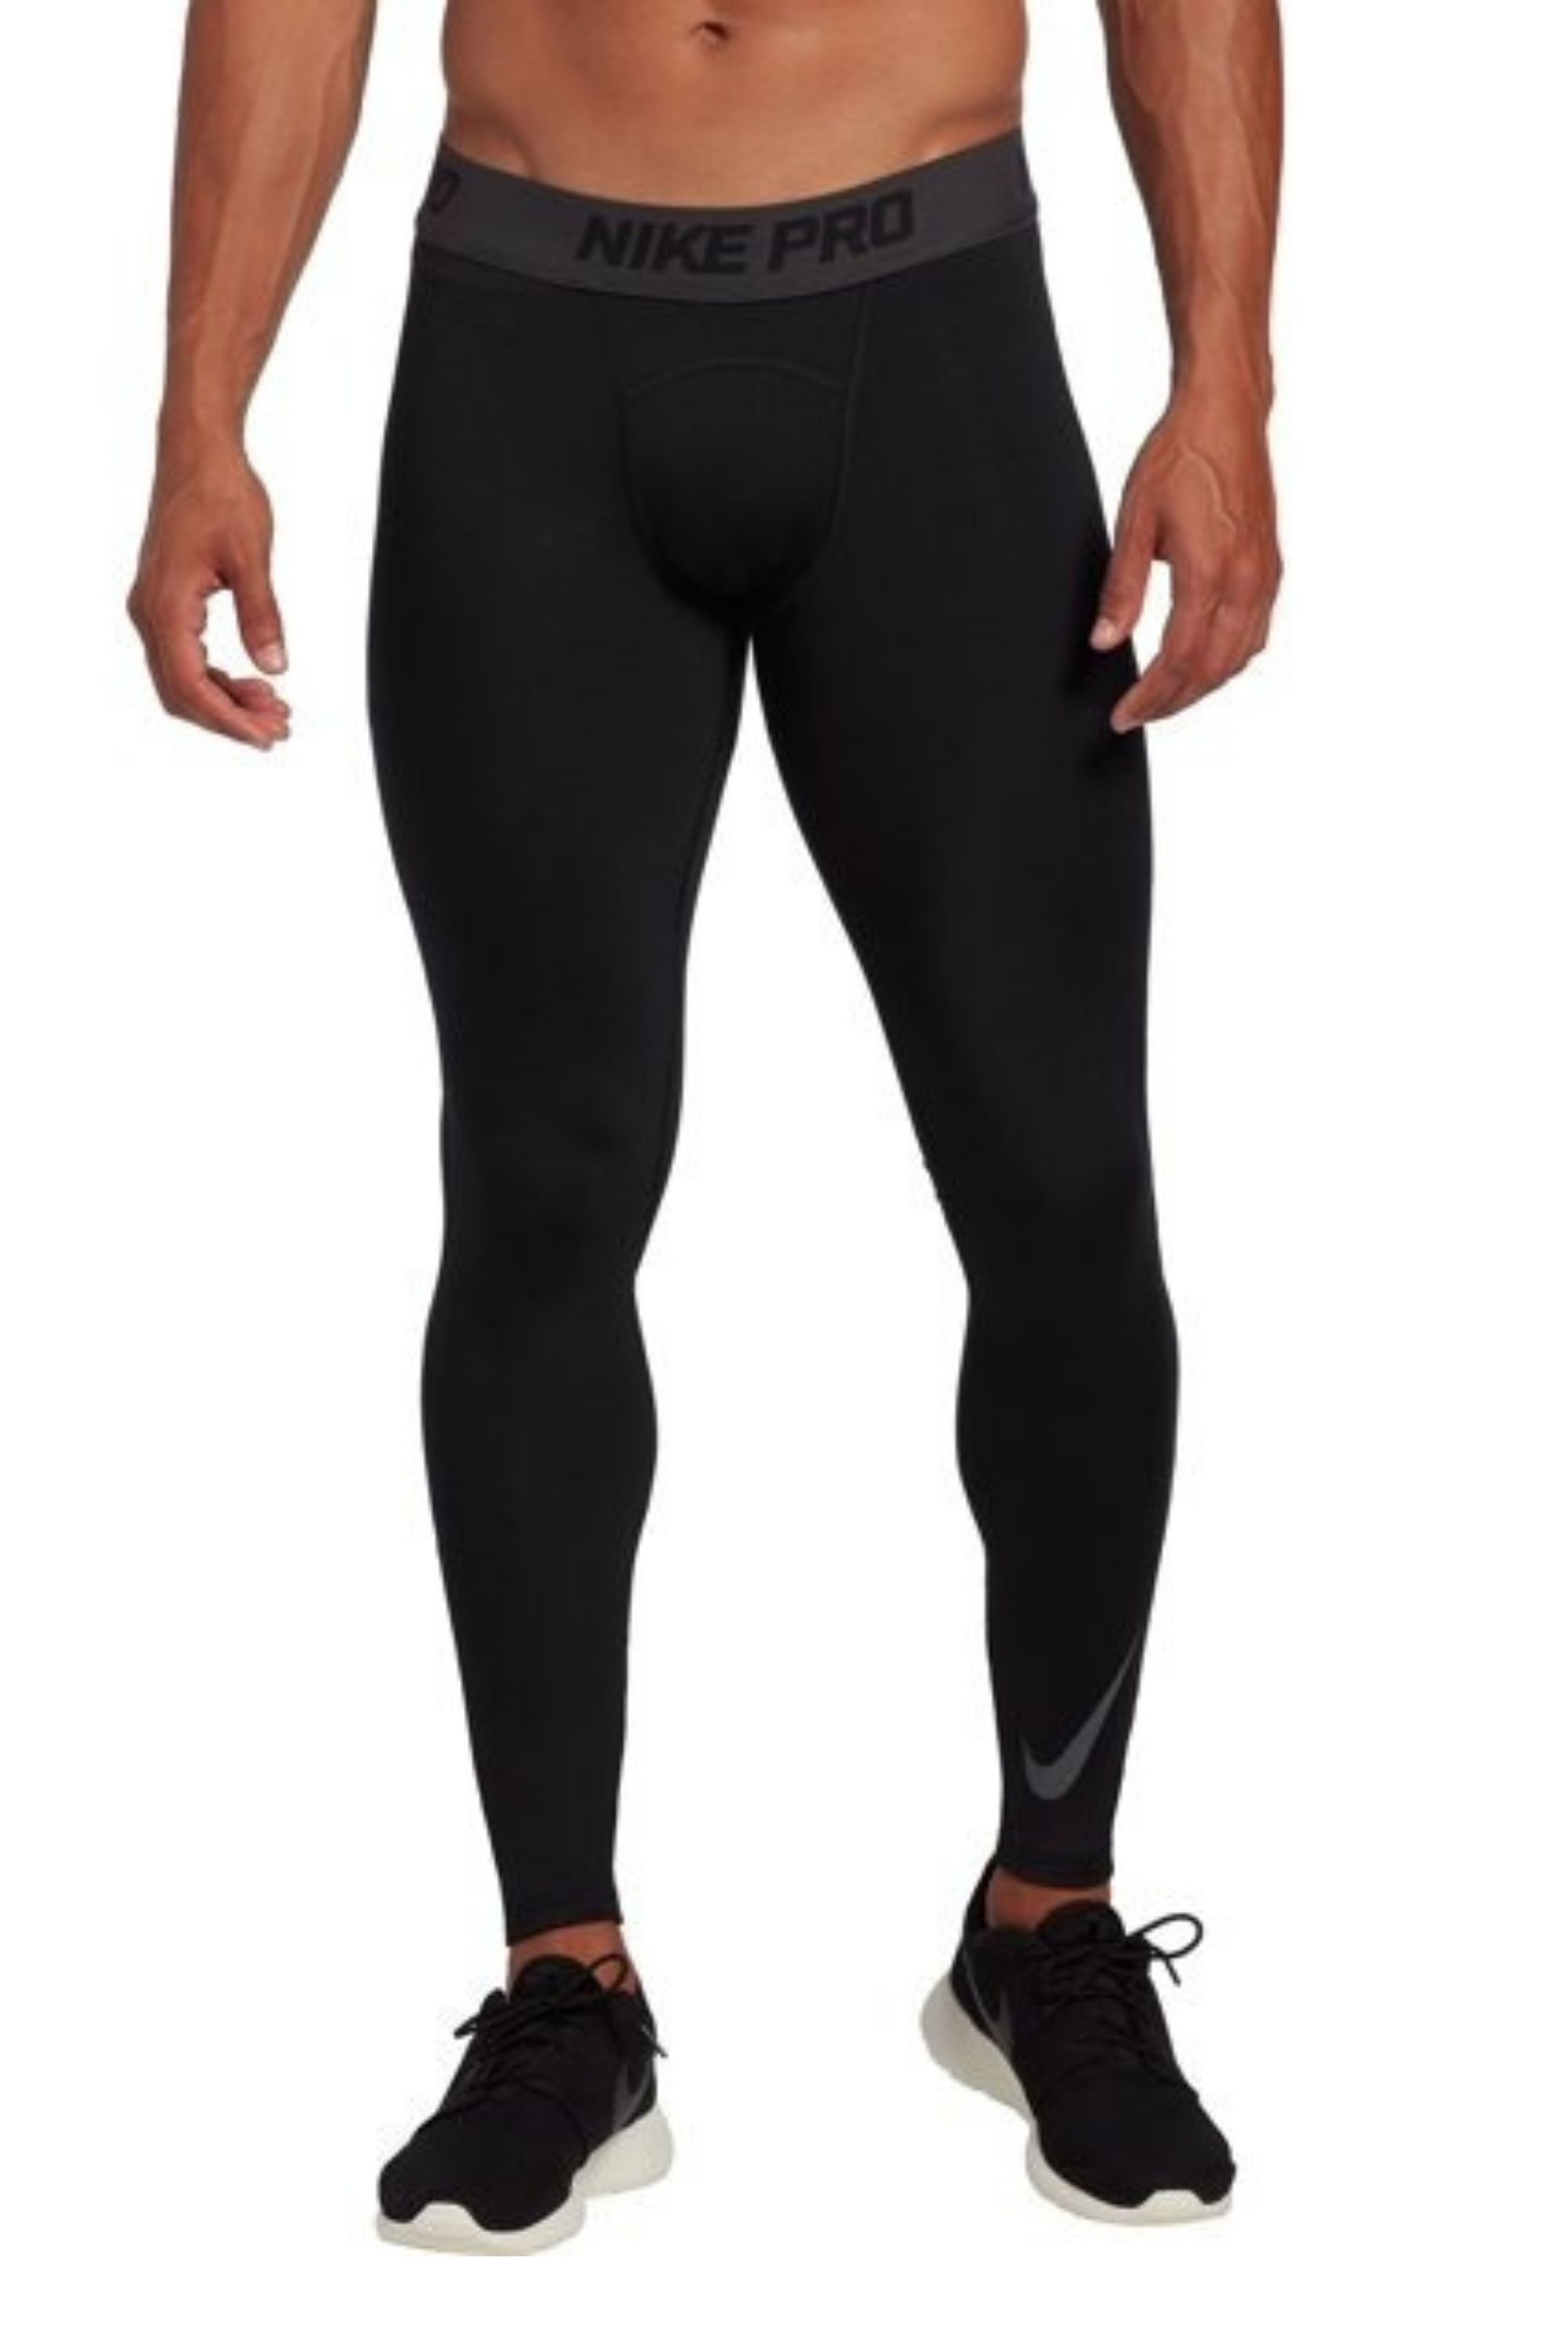 Foxter Mens Core Super Roubaix Thermal Leggings Compression Tights Winter Base Layer Recovery Pants Running Fitness Pants 